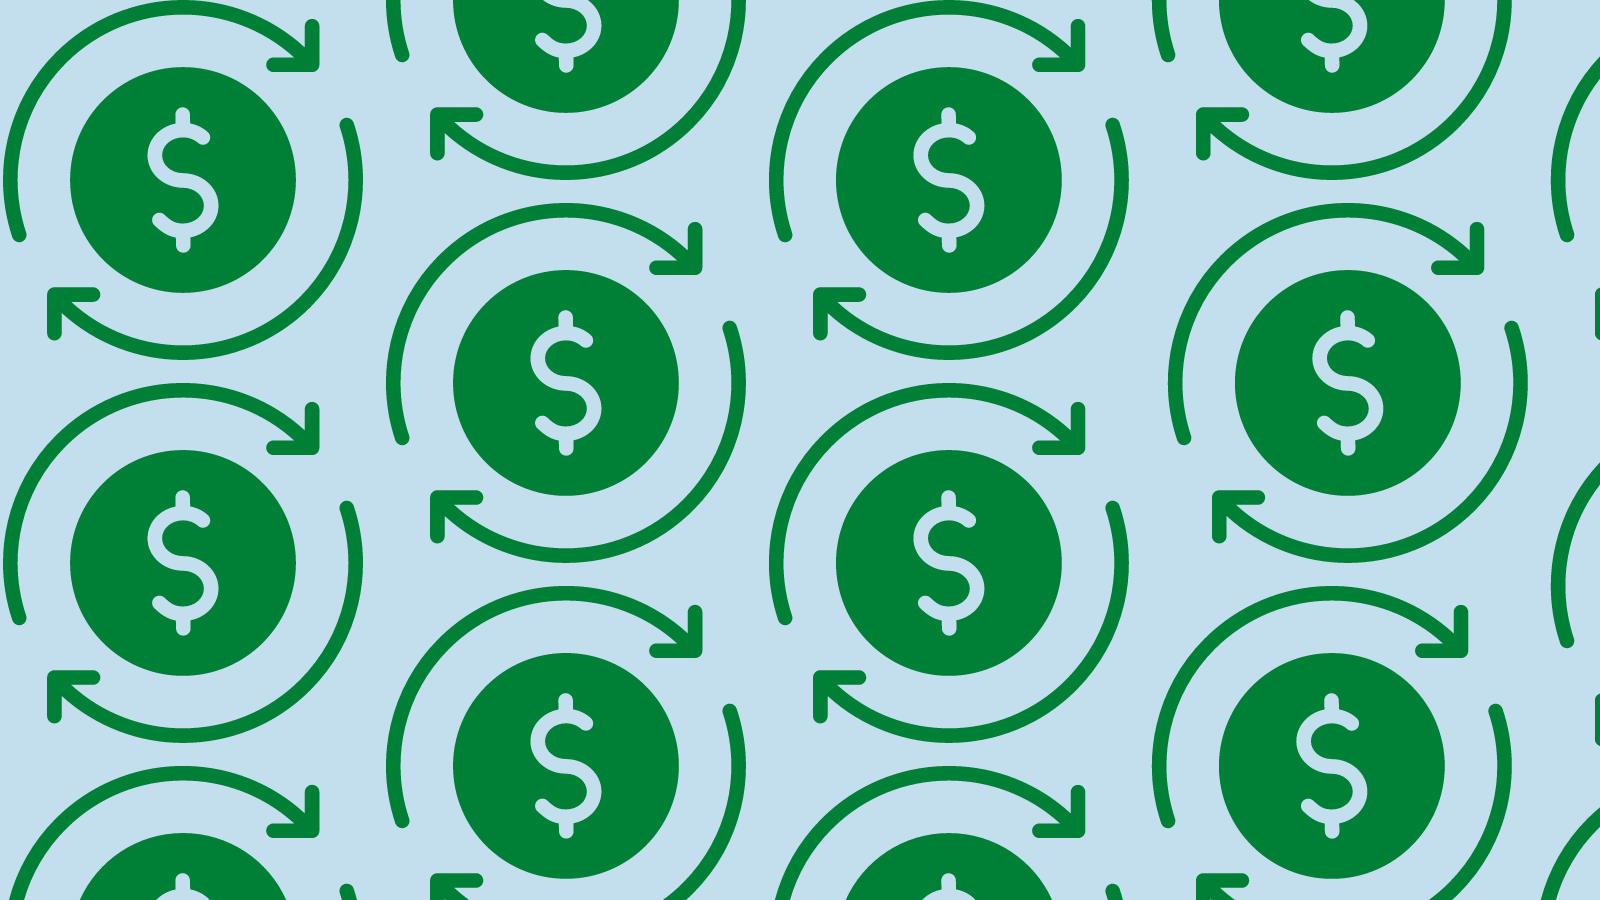 Dollar signs with arrows forming a circle around them